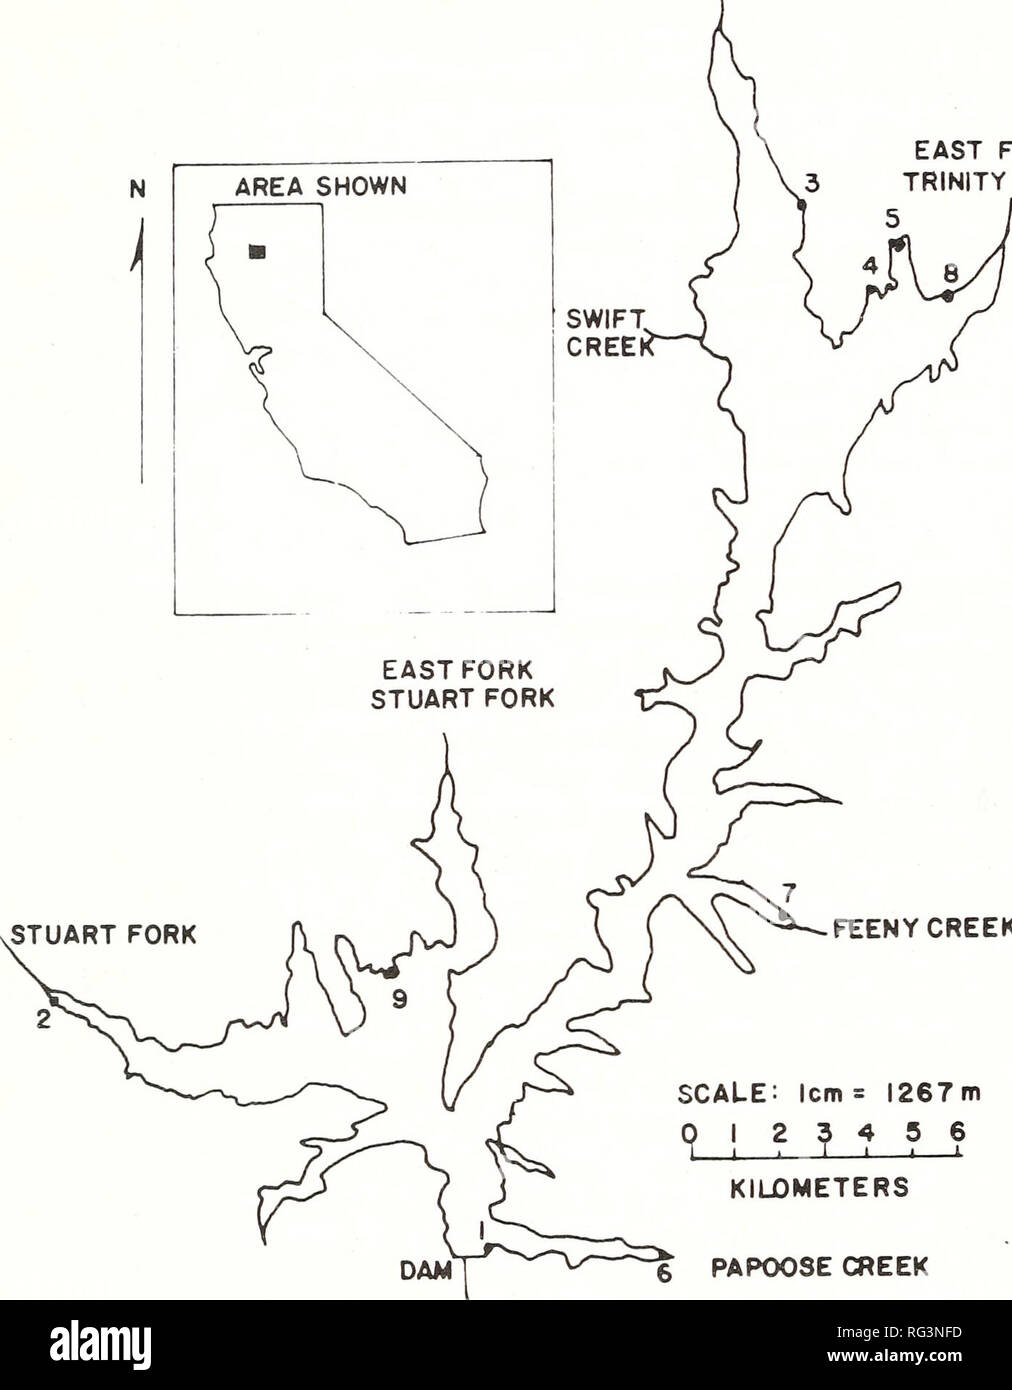 . California fish and game. Fisheries -- California; Game and game-birds -- California; Fishes -- California; Animal Population Groups; Pêches; Gibier; Poissons. 78 CALIFORNIA FISH AND CAME TRINITY RIVER EAST FORK 3 TRINITY RIVEP 5. FEENY CREEK SCAUE: icm = 1267m 0 1 2 3 4 5 6 I I 1—I—1 1 i- KiUOMETERS 6 PAPOOSE CREEK FICURE 1. Clair Engle Reservoir California, showing sampling stations in three types of habitats: (1) protected areas near major tributaries (Stations 2, 6, and 7); (2) sheltered gently sloping littoral areas (Stations 4, and 5); and (3) unprotected steeply sloping littoral areas Stock Photo